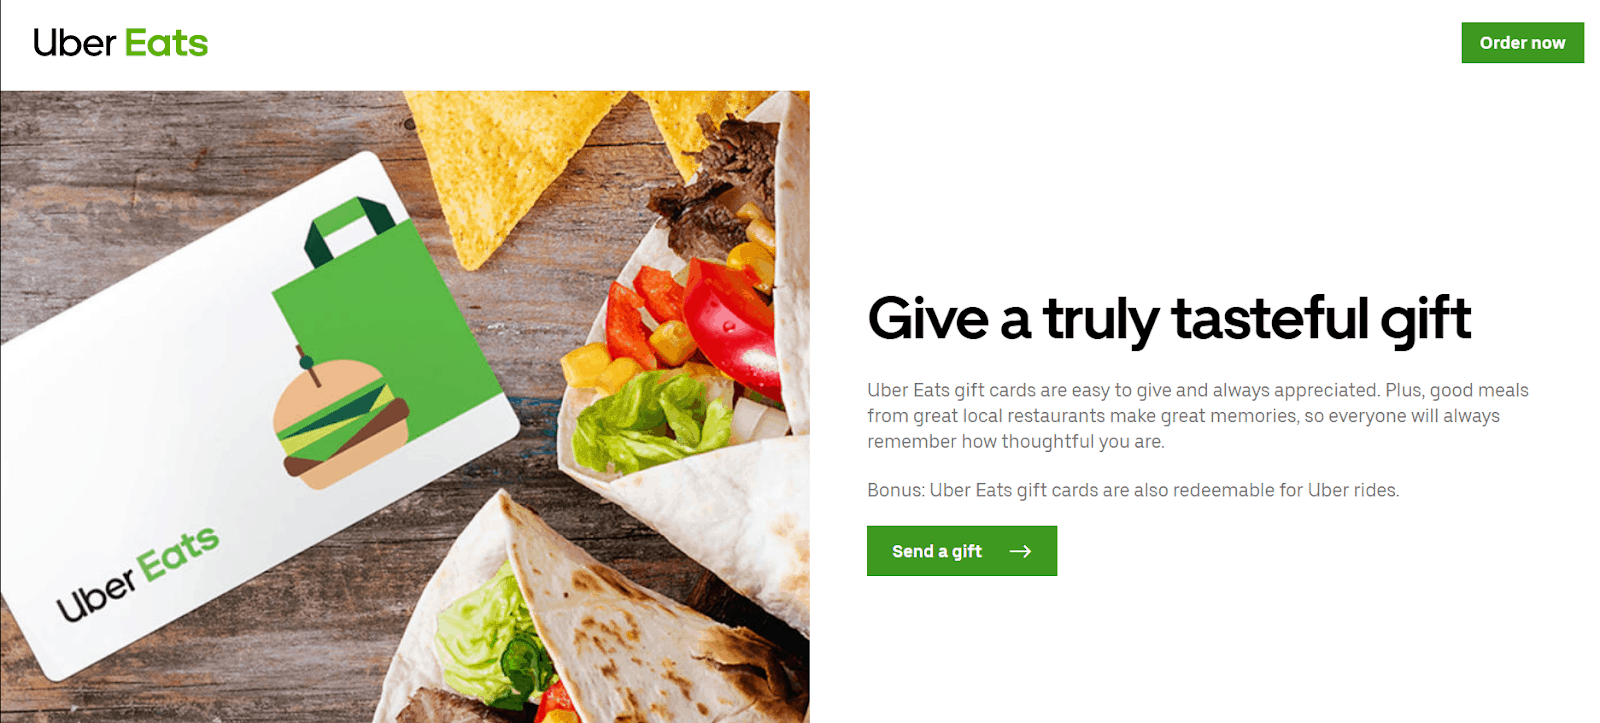 The Uber webpage to purchase an Uber Eats gift card